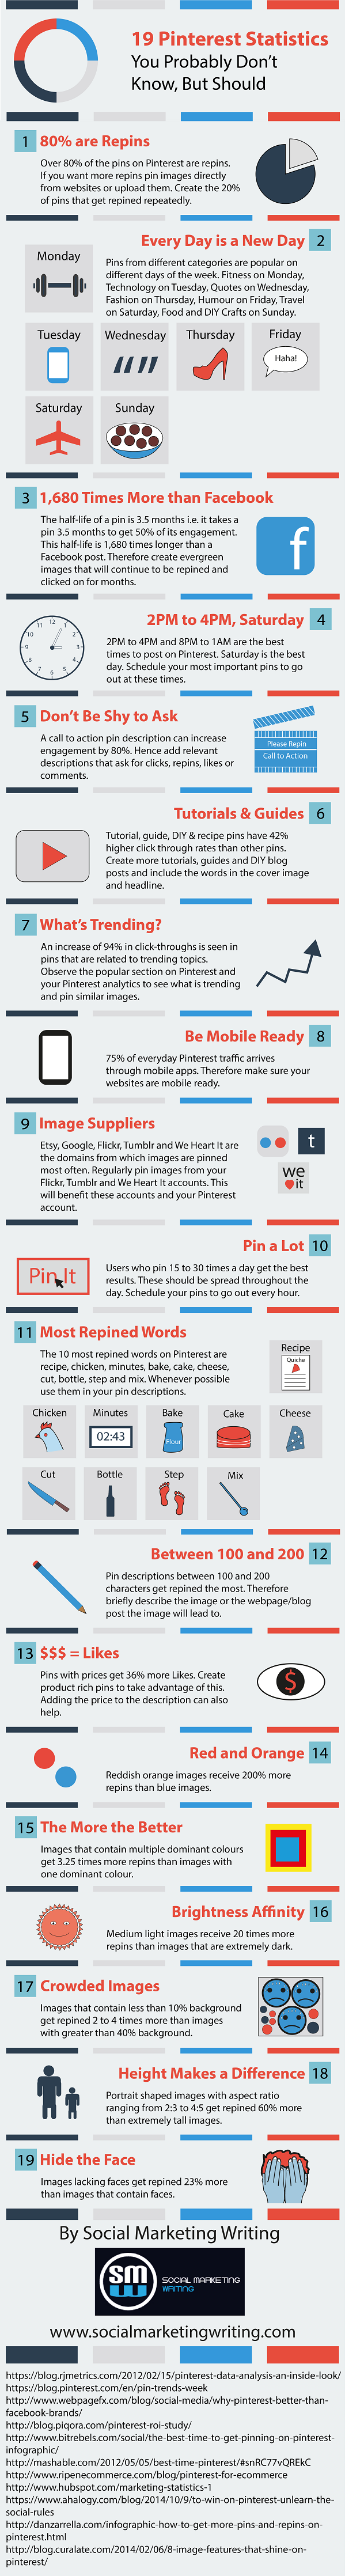 19-Pinterest-Statistics-You-Probably-Don’t-Know-But-Should-Infographic